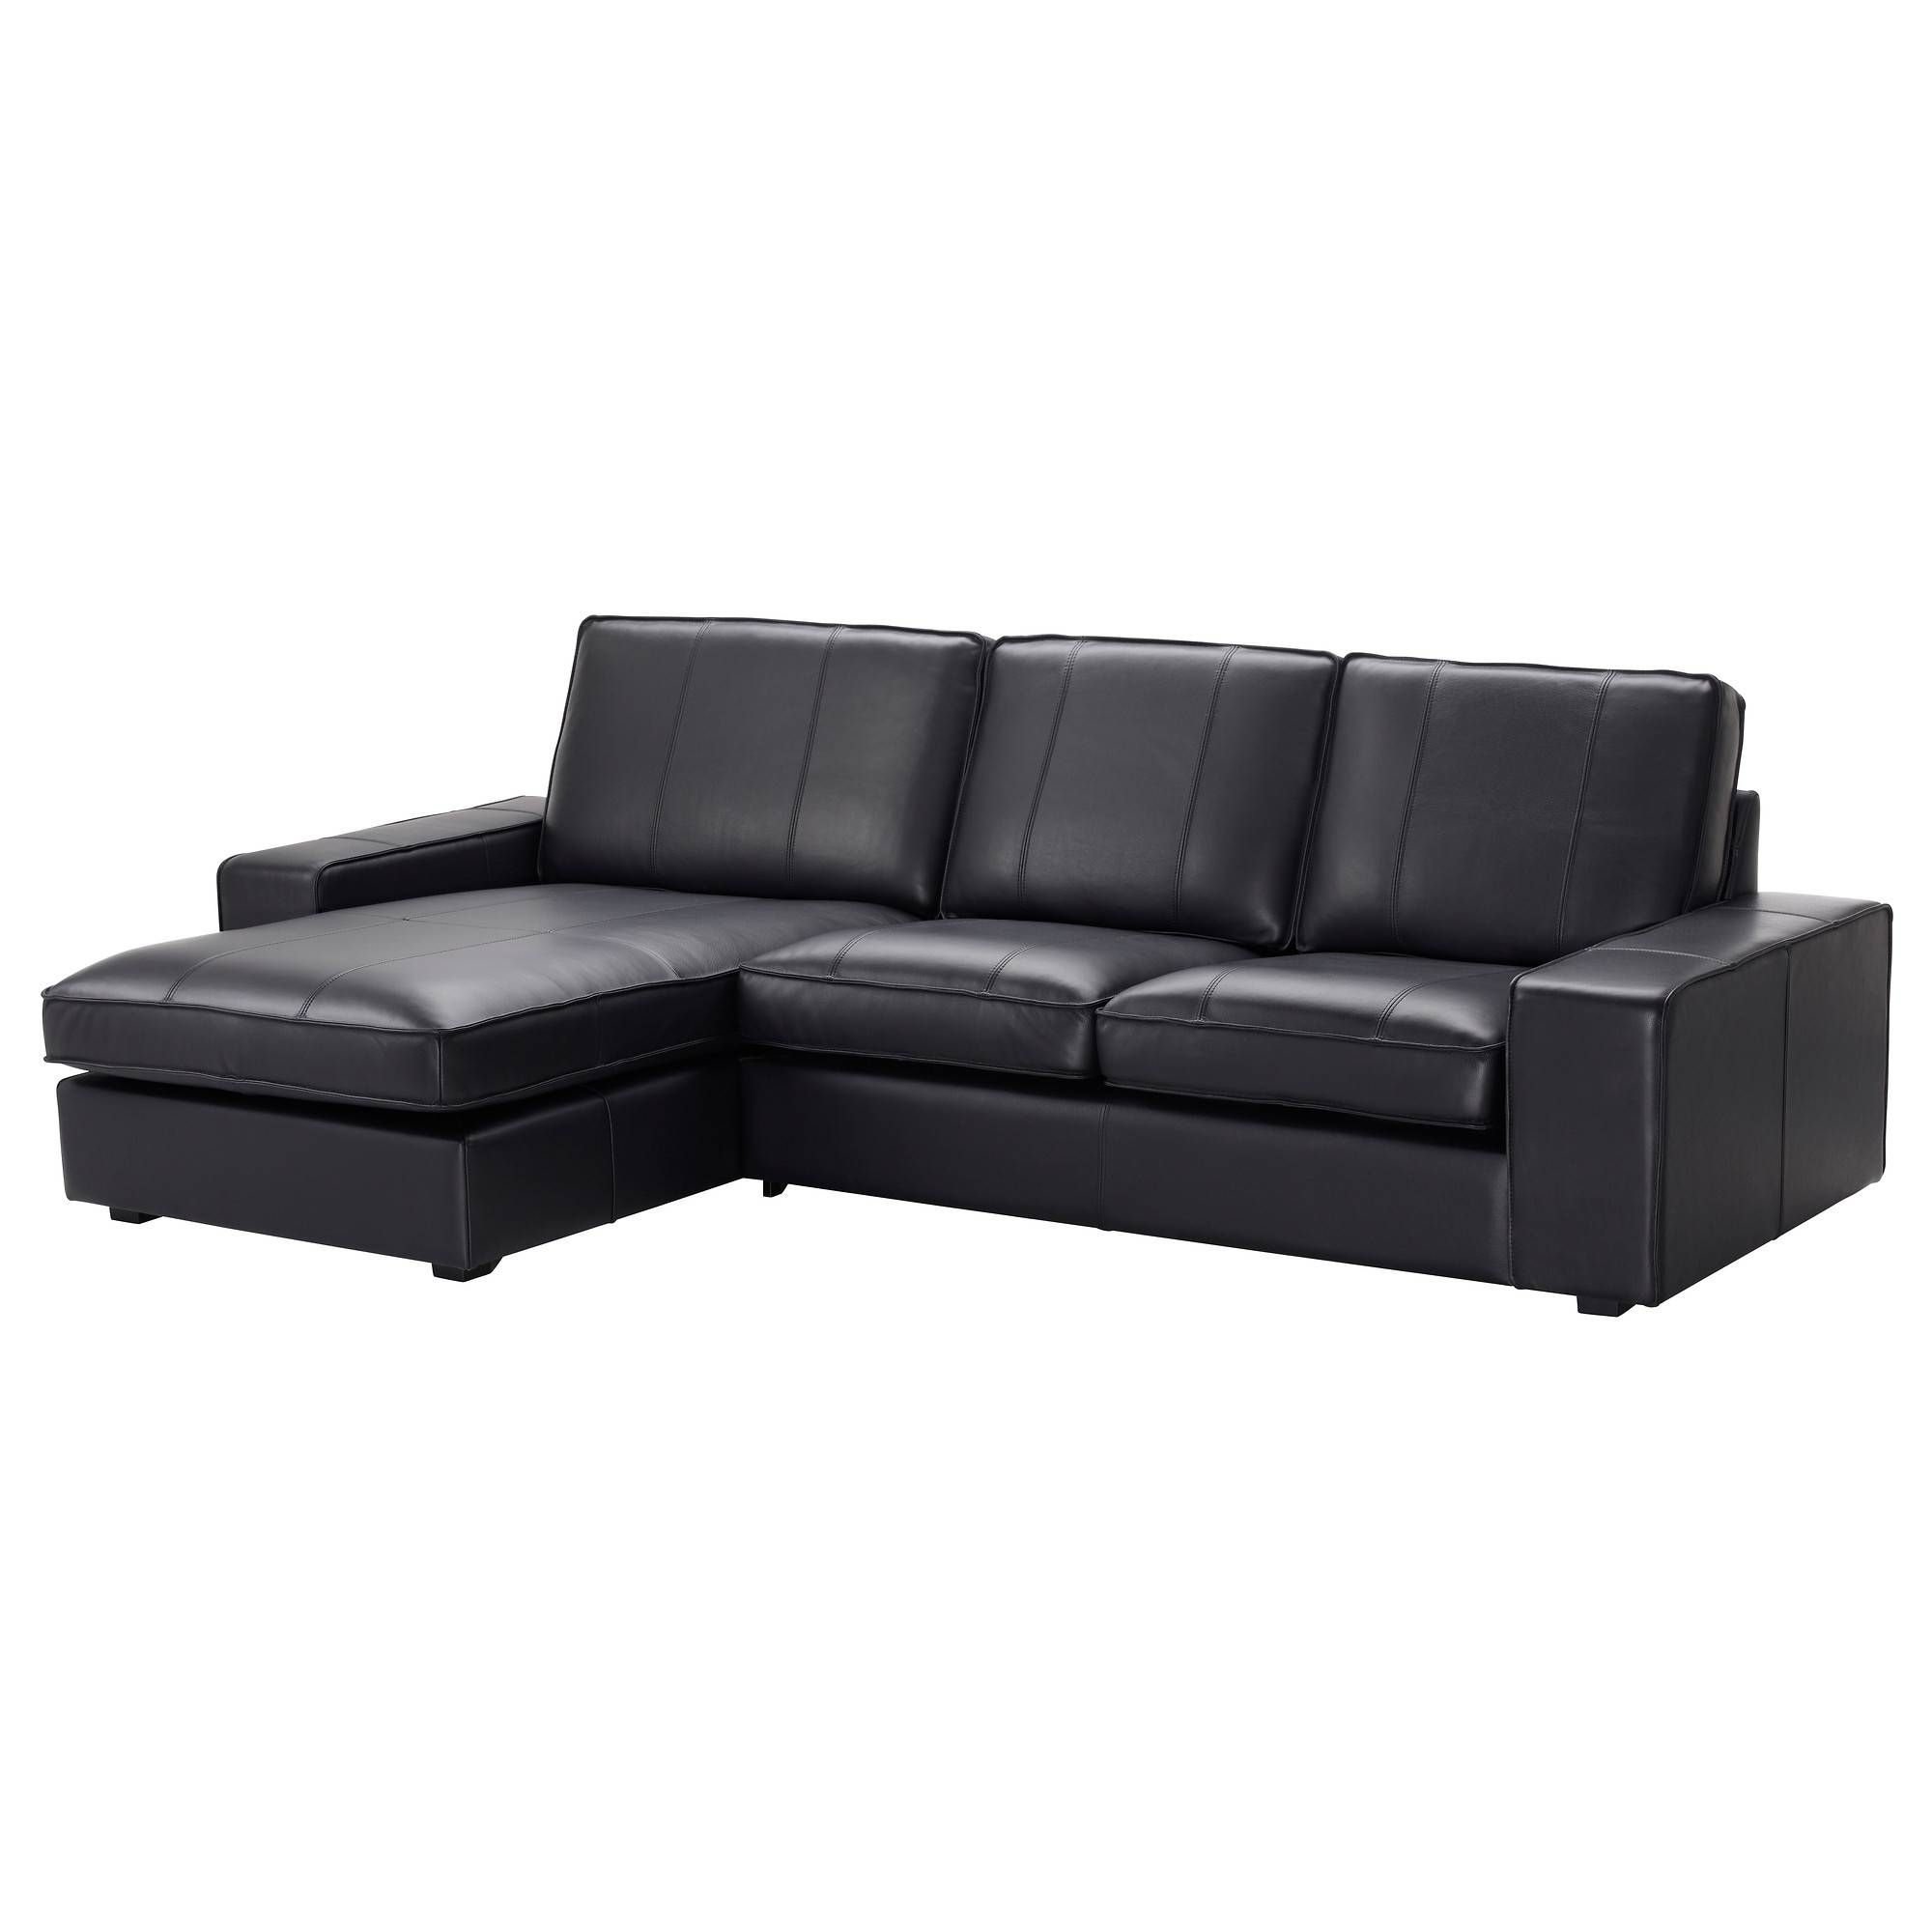 Leather & Faux Leather Couches, Chairs & Ottomans – Ikea In Black Leather Chaise Sofas (View 12 of 15)